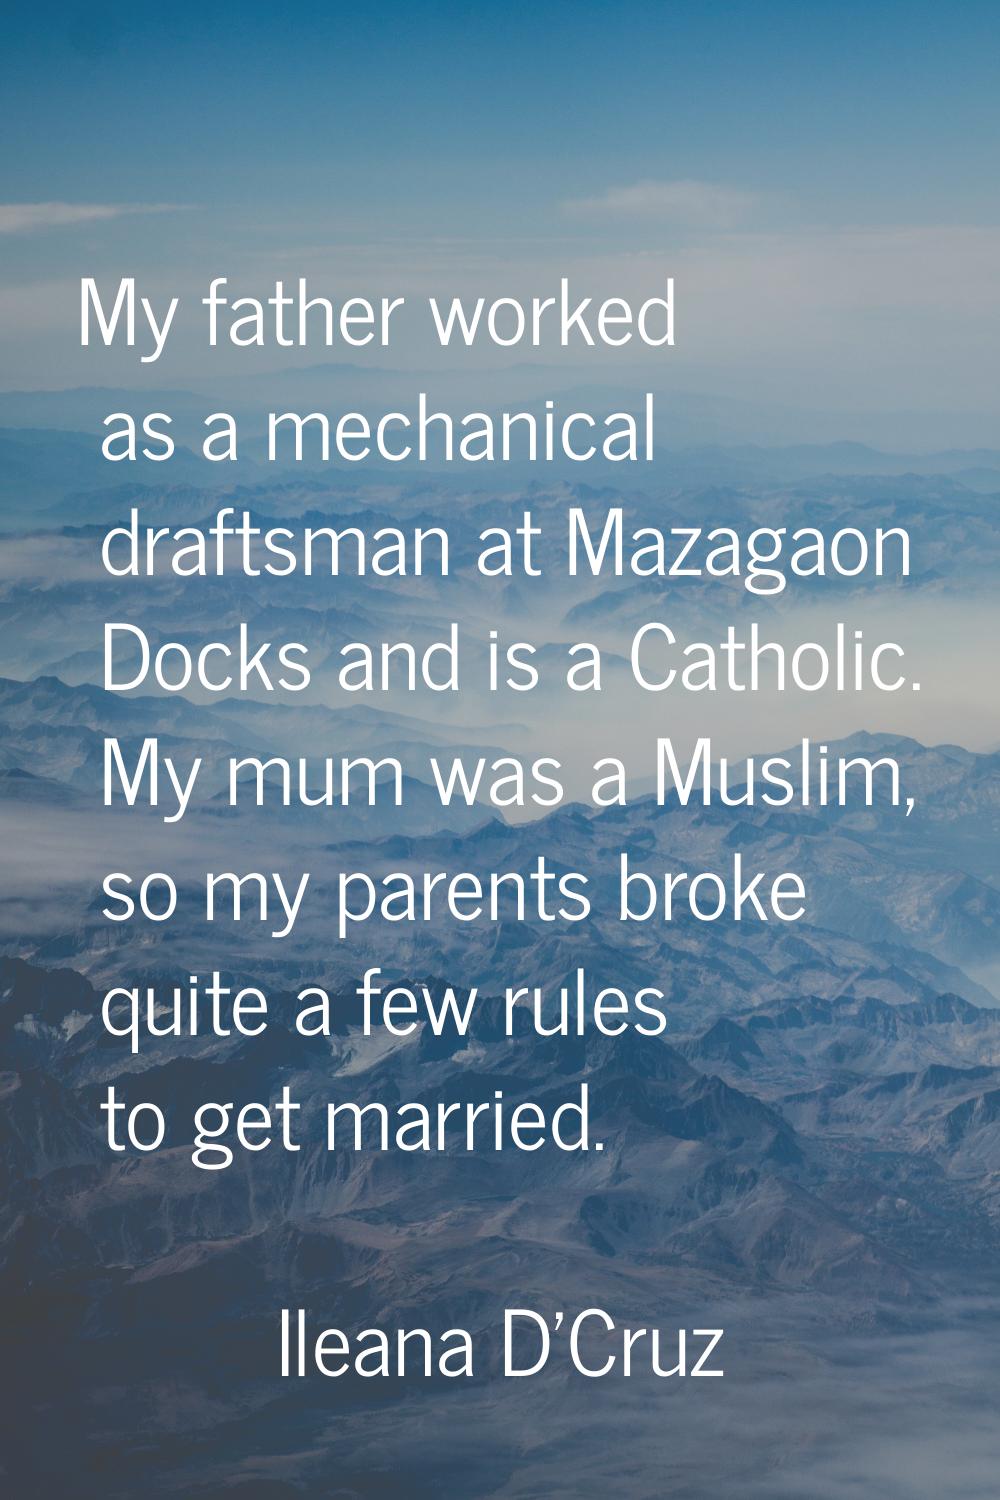 My father worked as a mechanical draftsman at Mazagaon Docks and is a Catholic. My mum was a Muslim